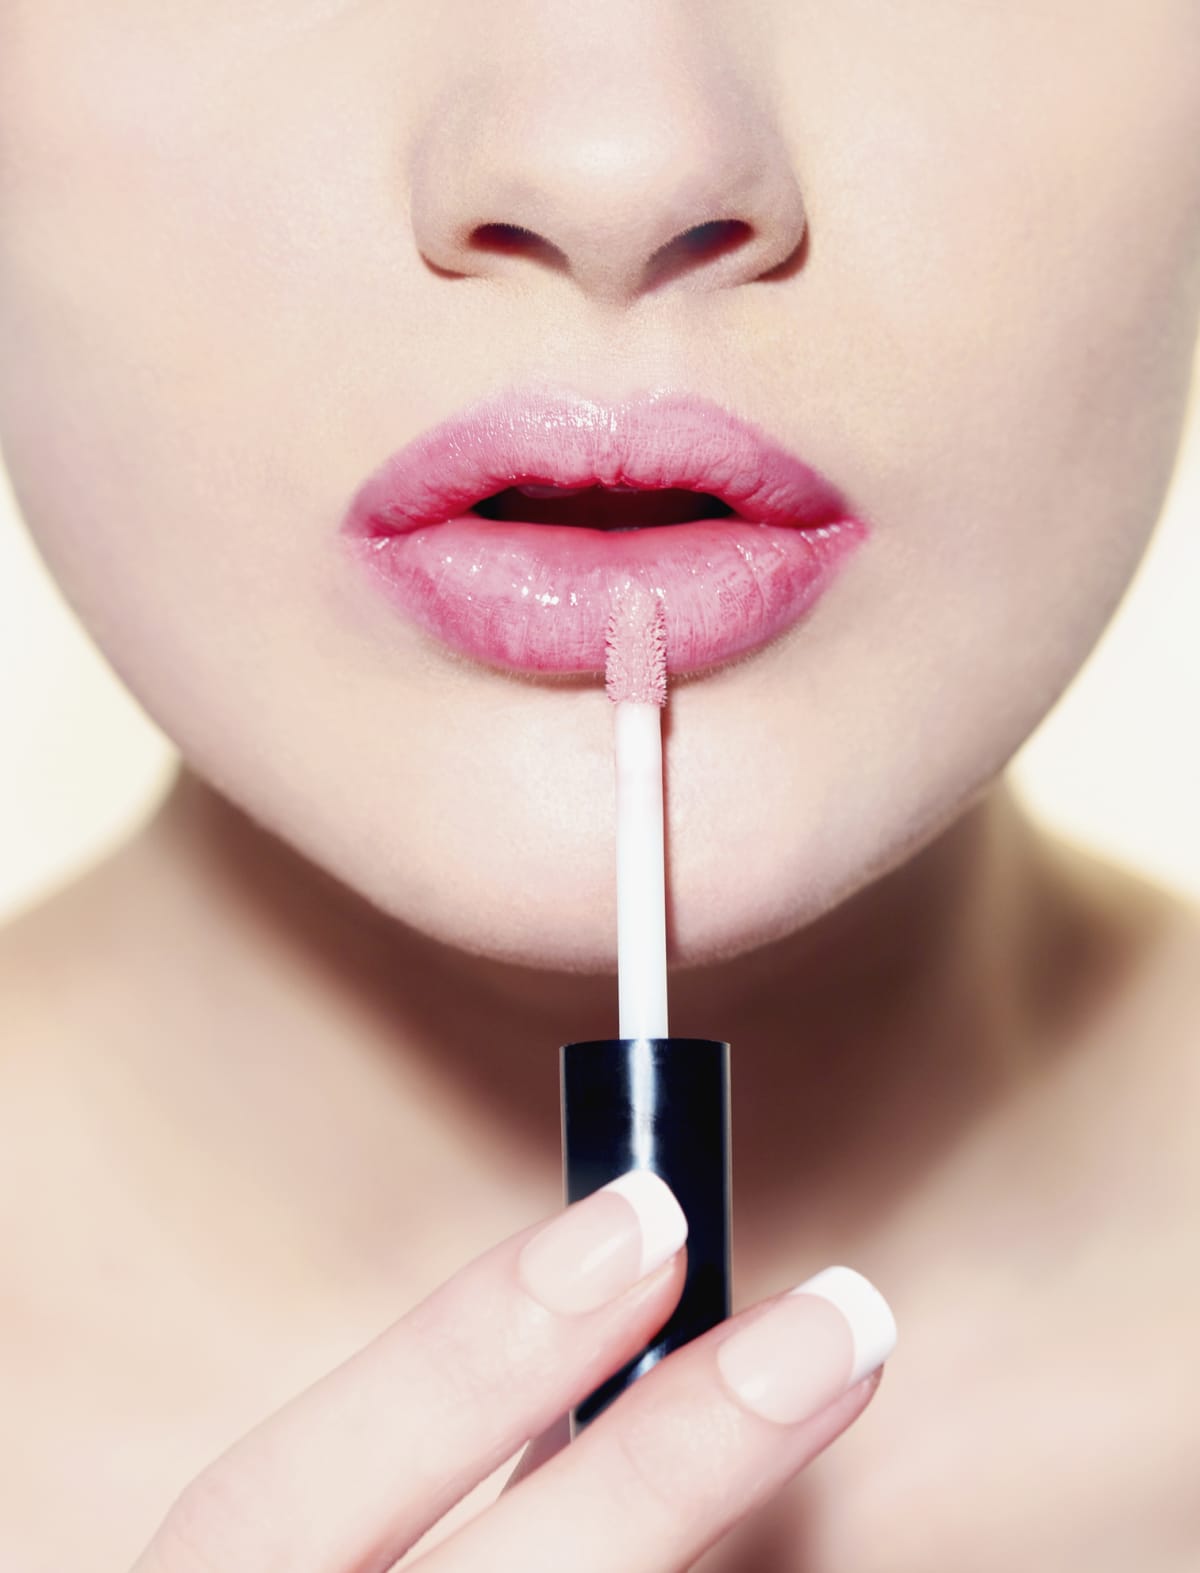 Closeup of a woman applying pink lip gloss to her lips